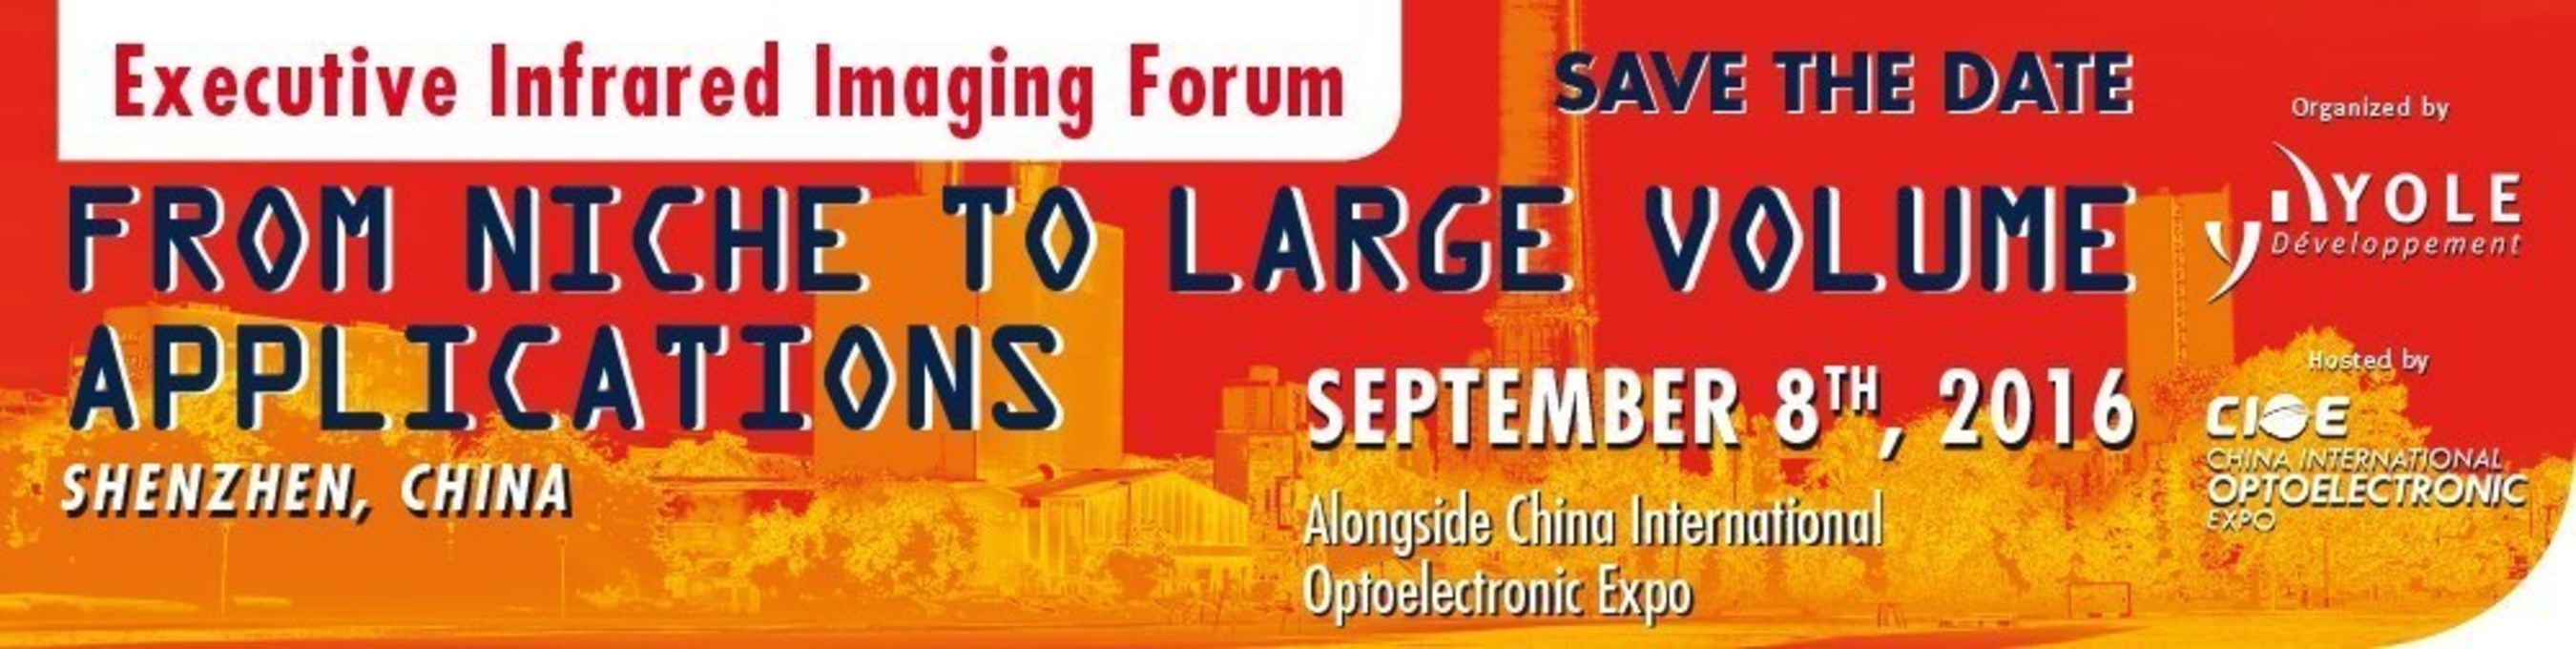 1st Executive Infrared Imaging Forum From Niche to Large Volume Applications